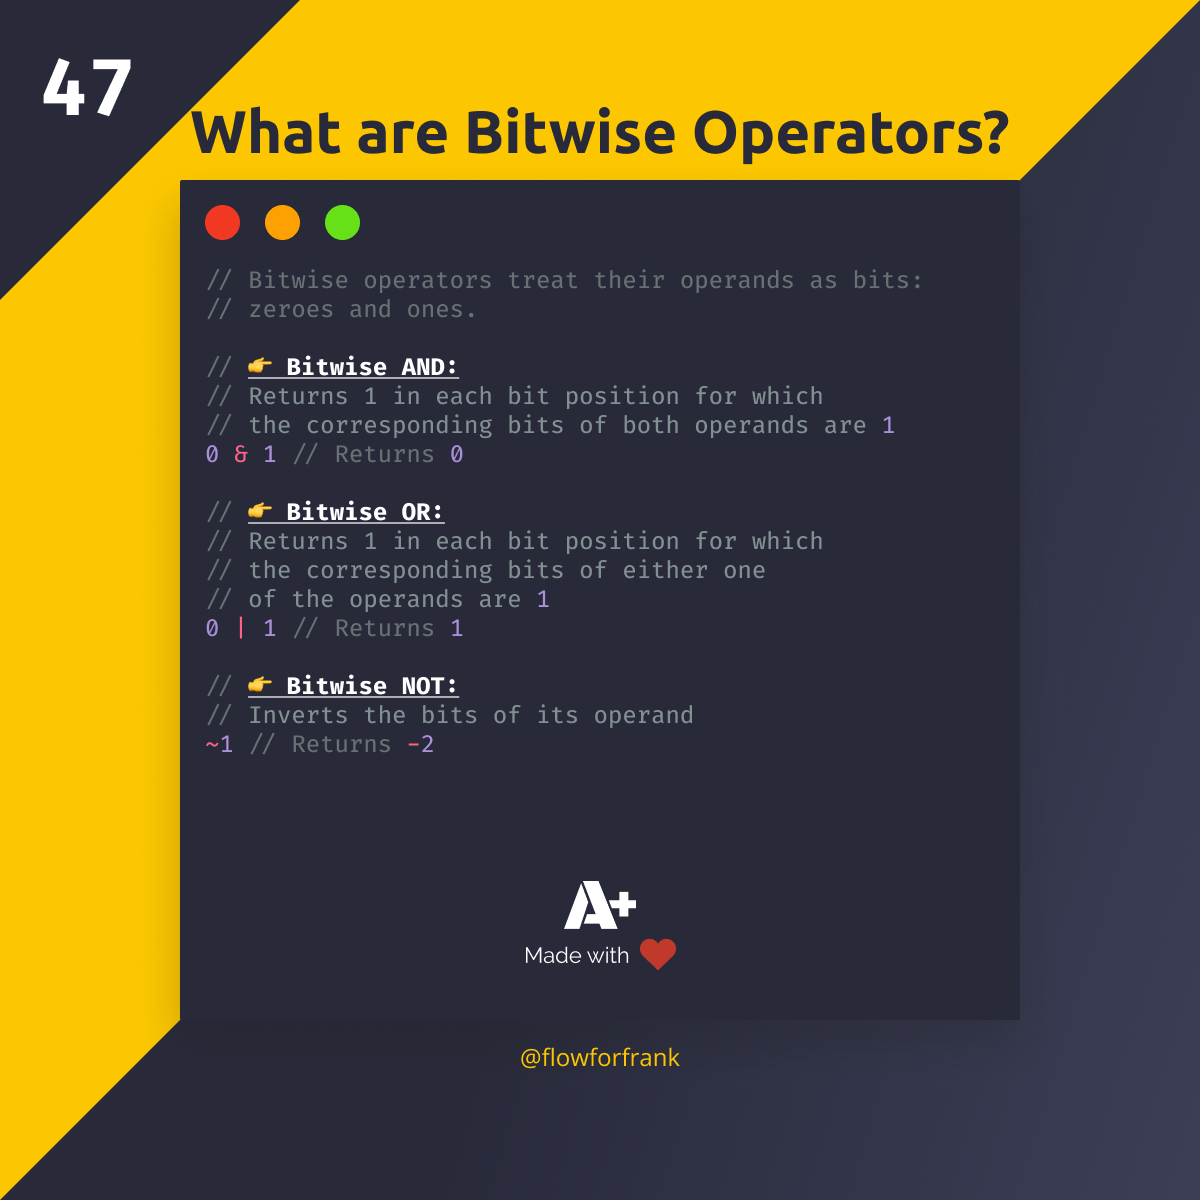 Why are Bitwise Operators?